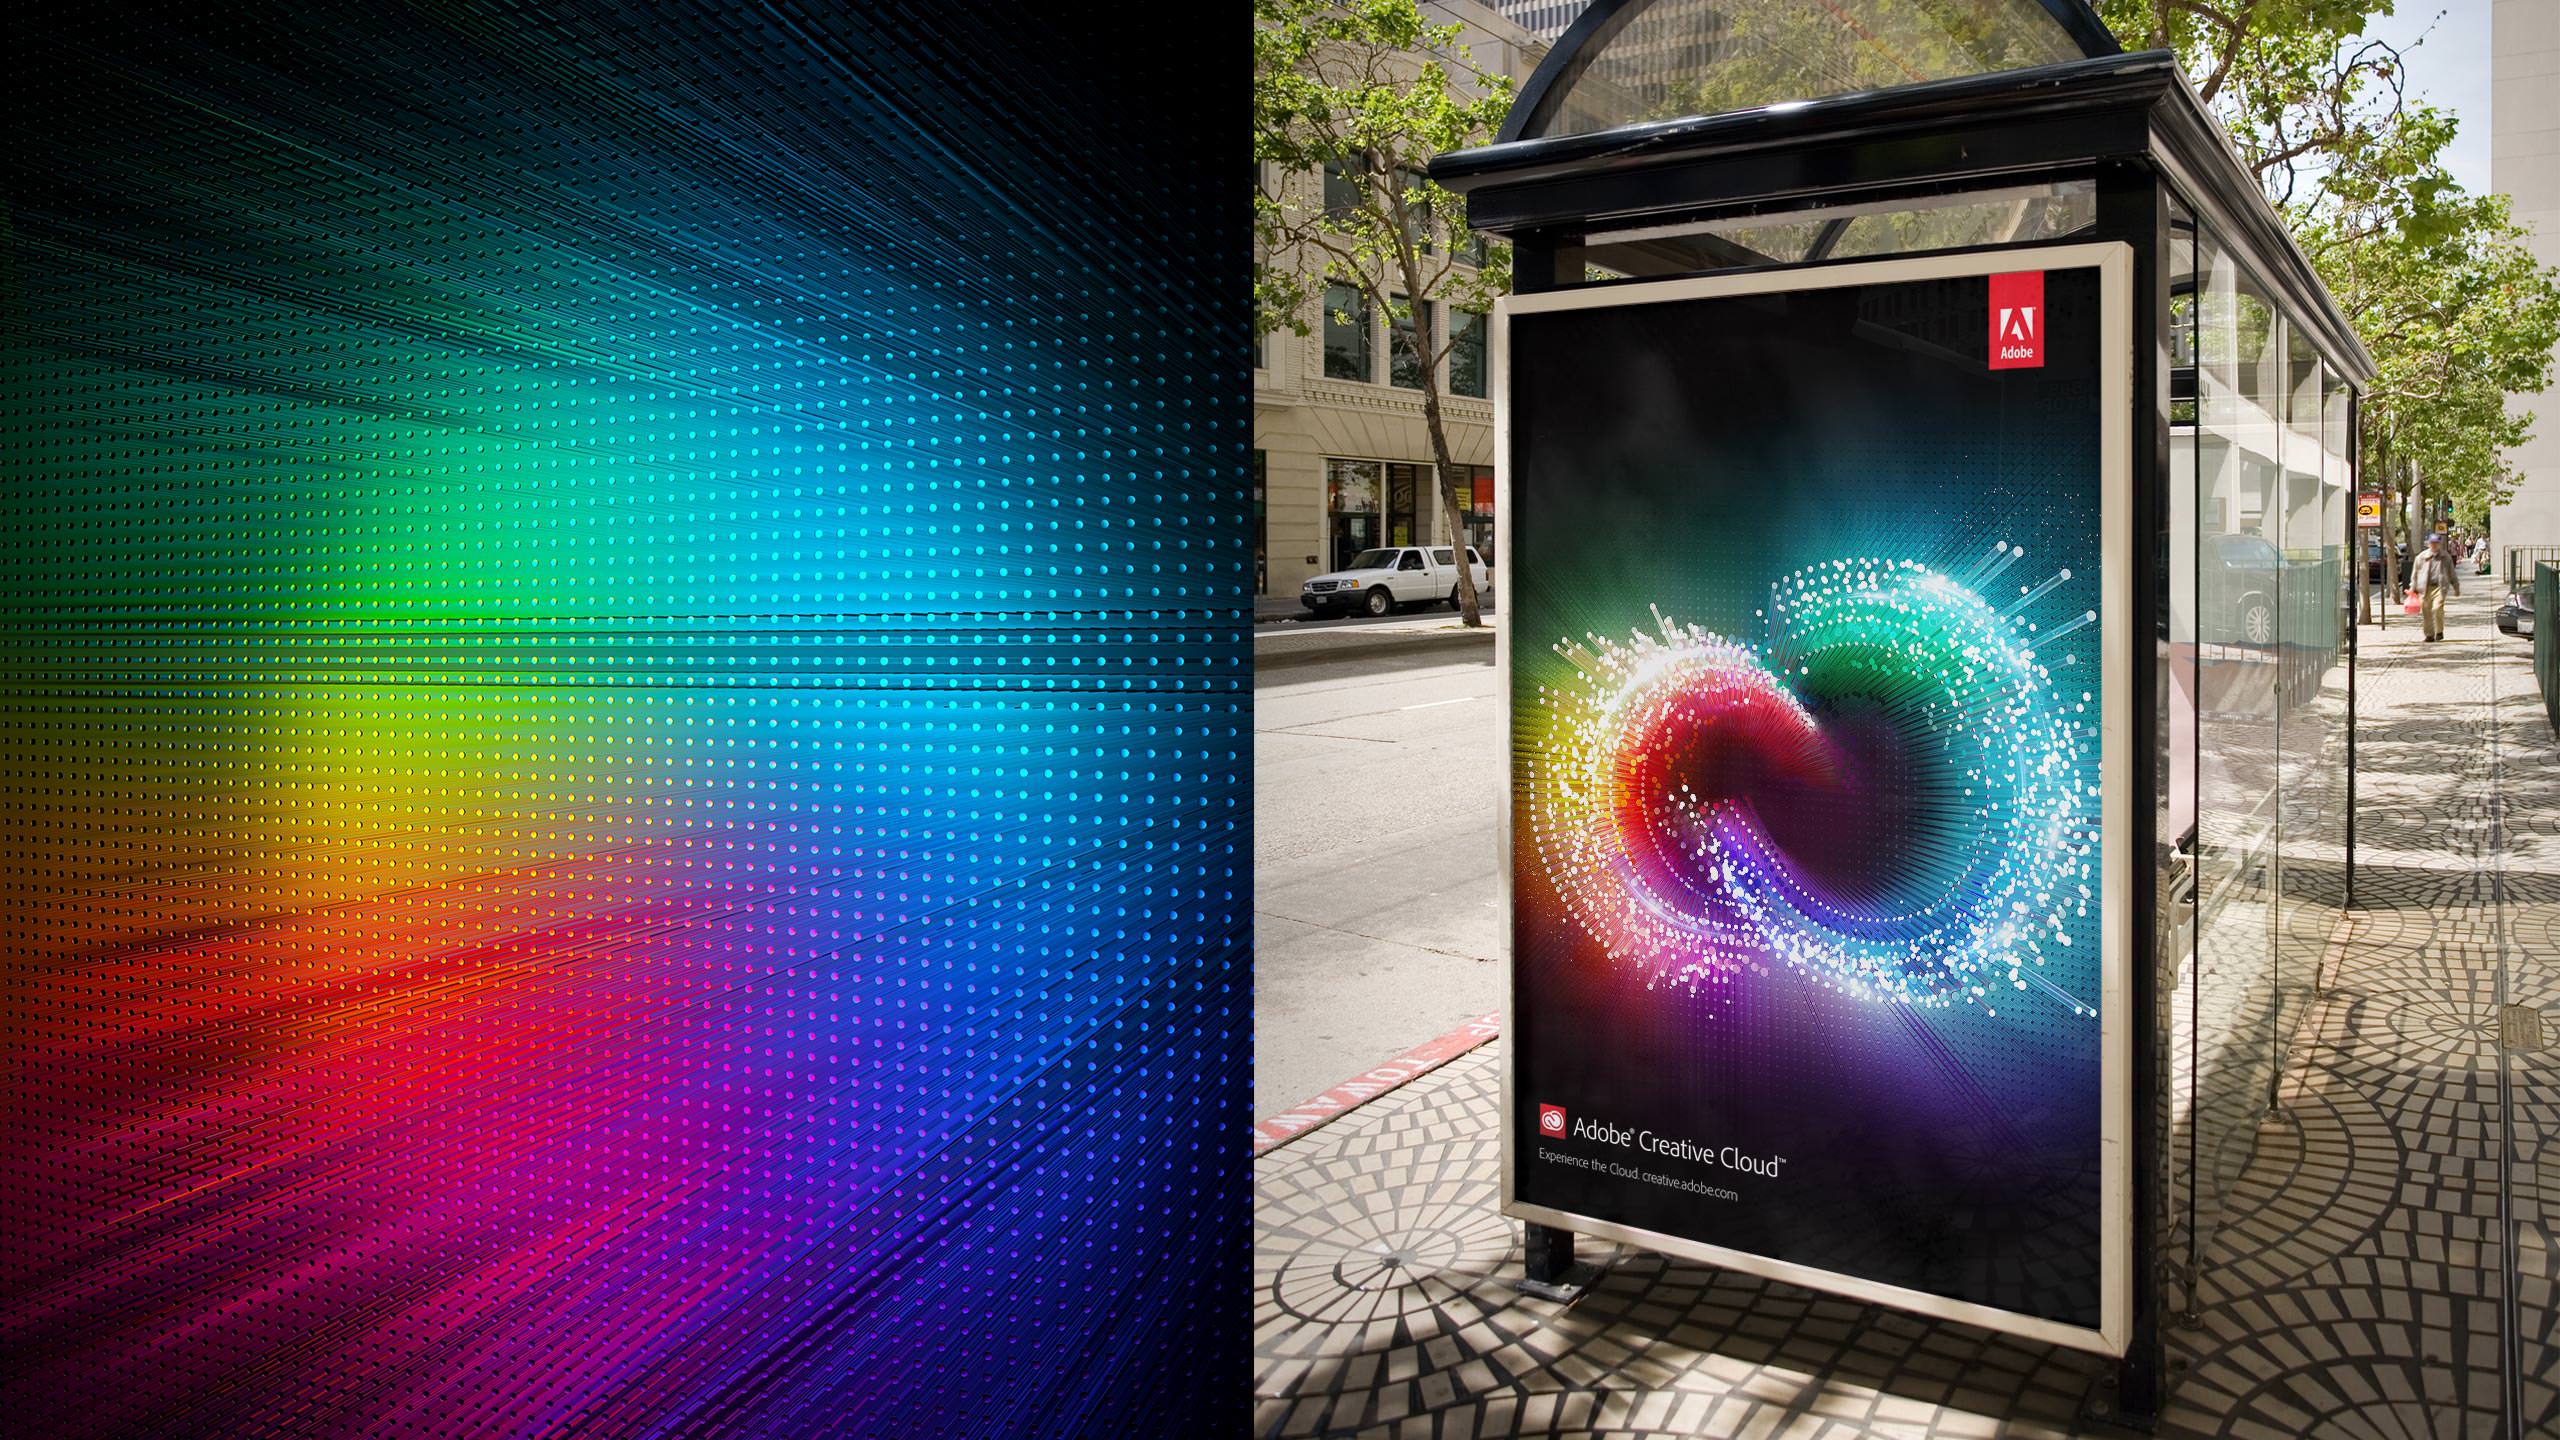 Adobe Creative Cloud with Texture on Bus Shelter Poster